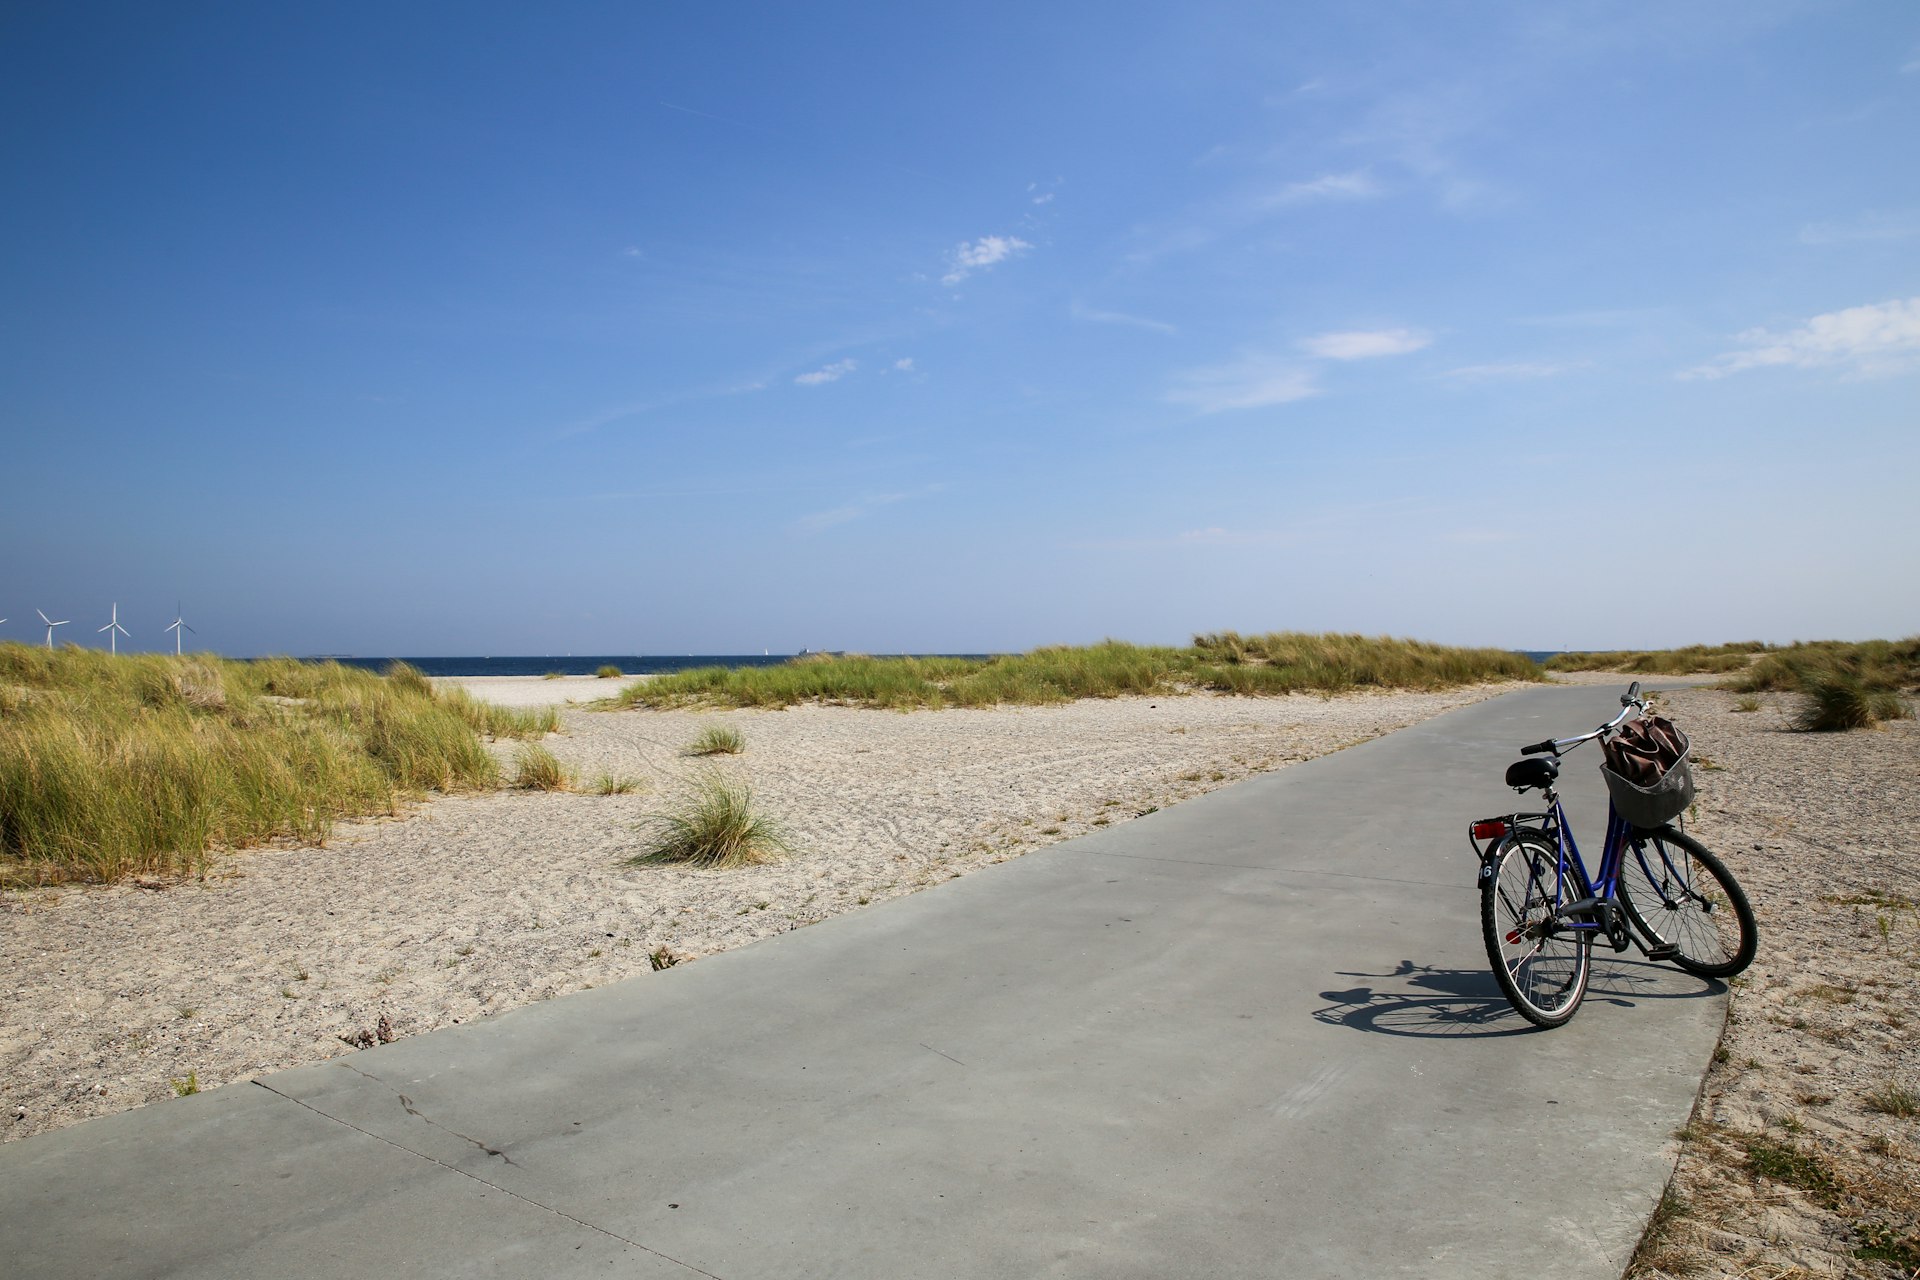 Amager Strand, a beach accessible by metro from Copenhagen's city centre